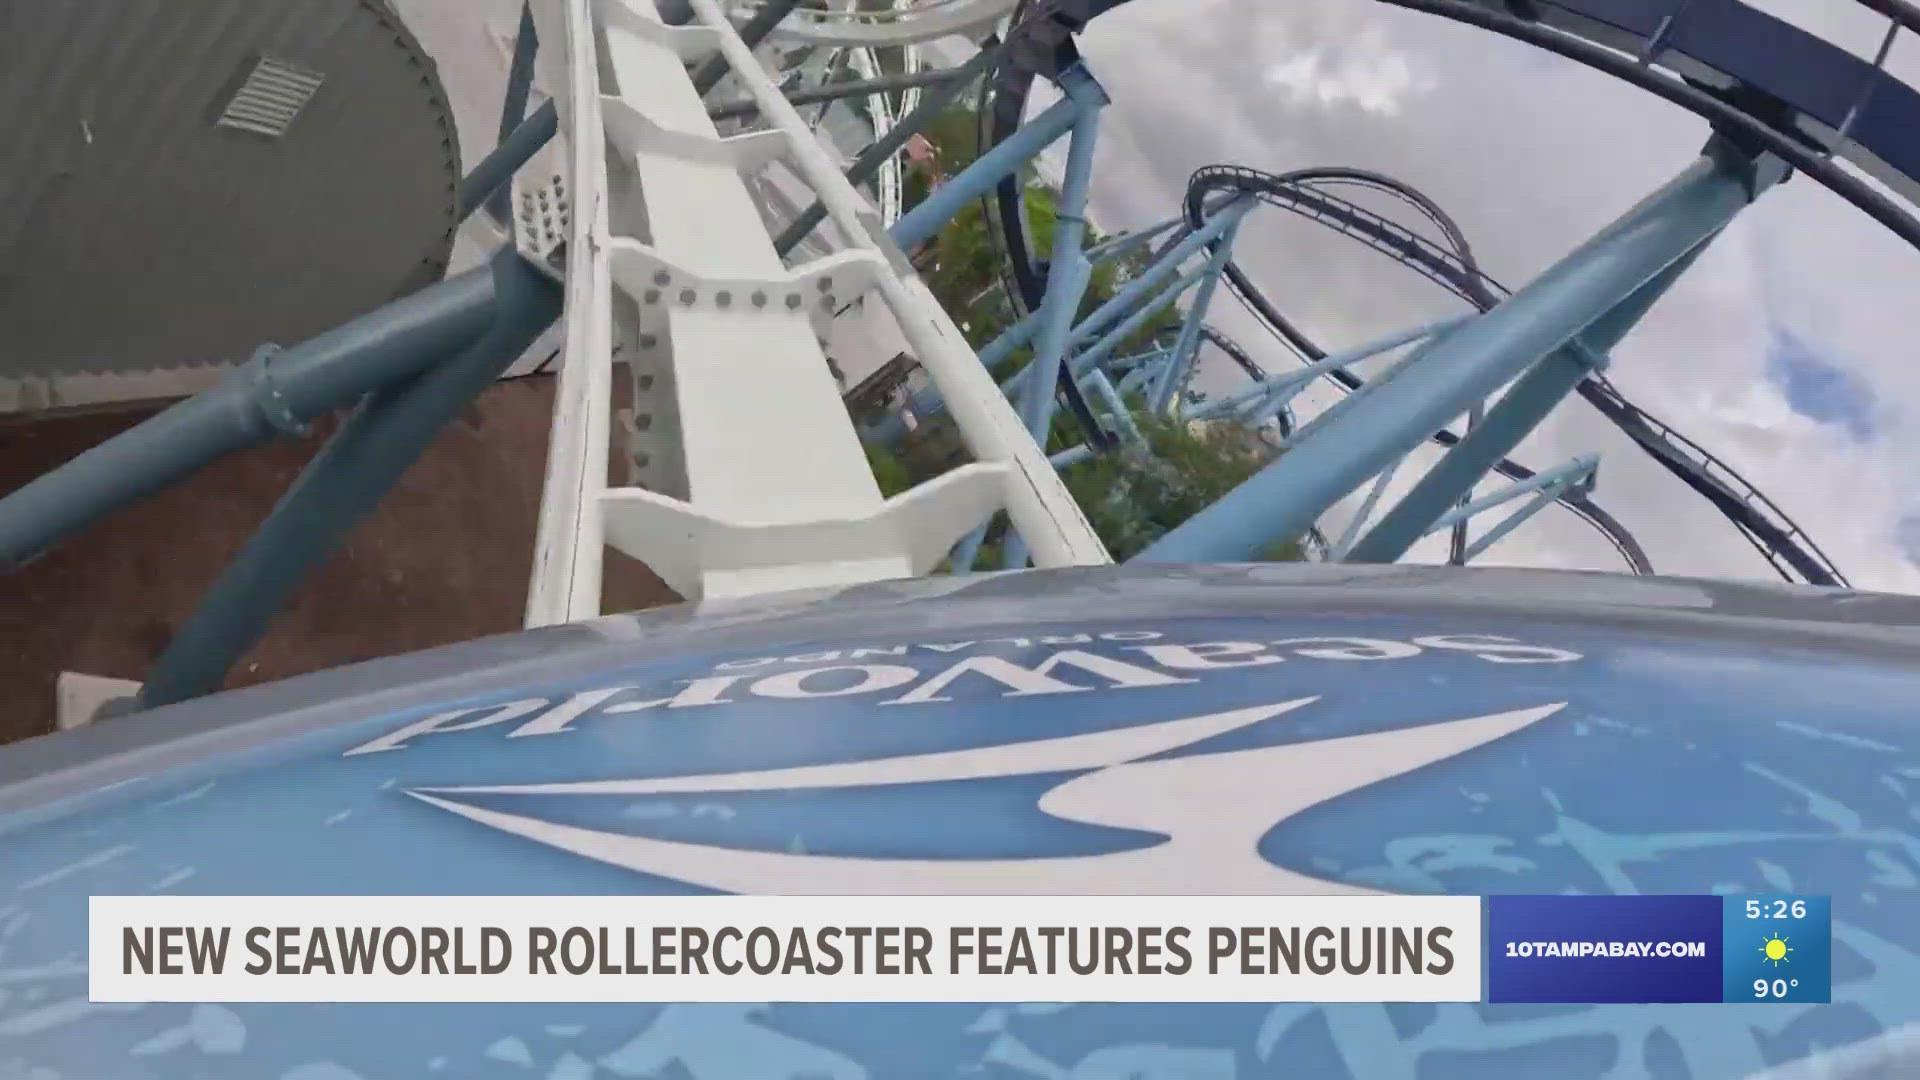 The new rollercoaster will end at a cold penguin habitat.